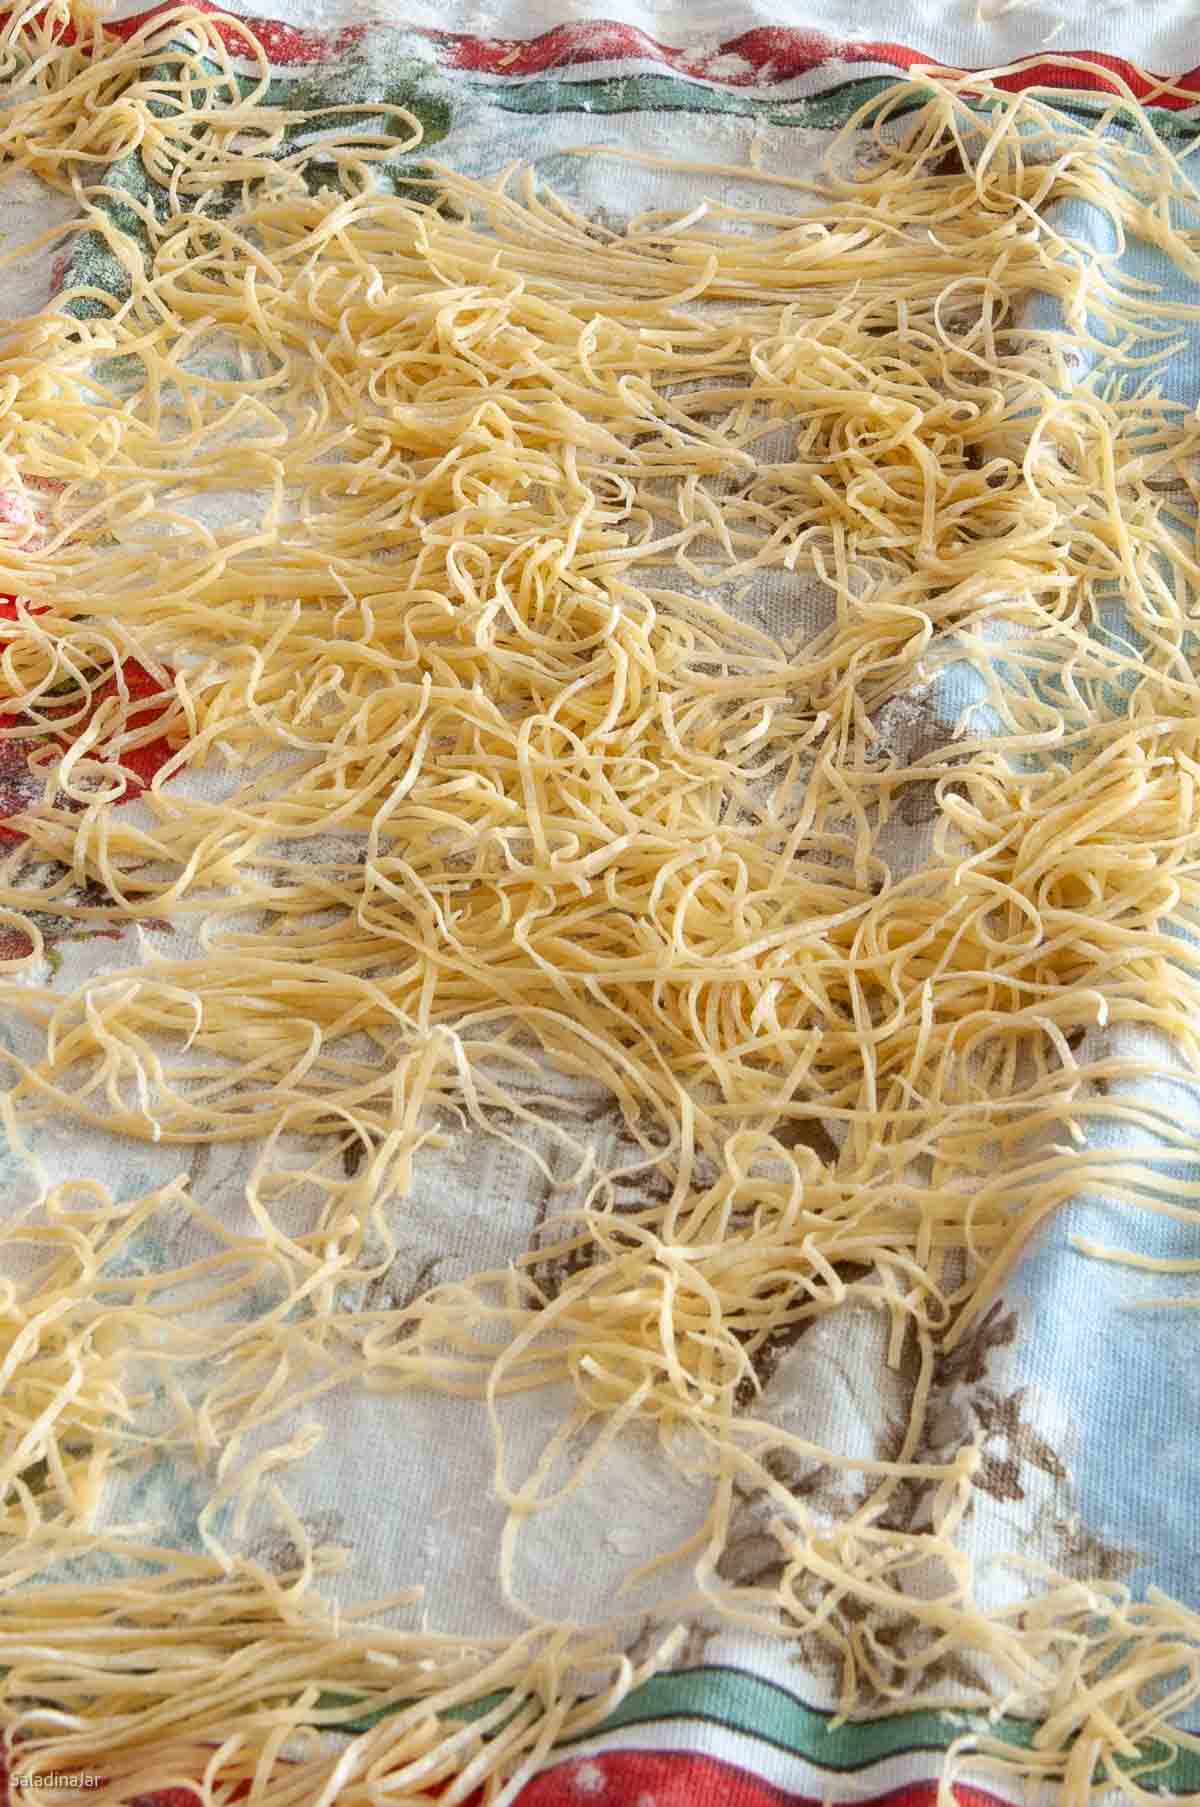 thin egg noodles drying on the counter